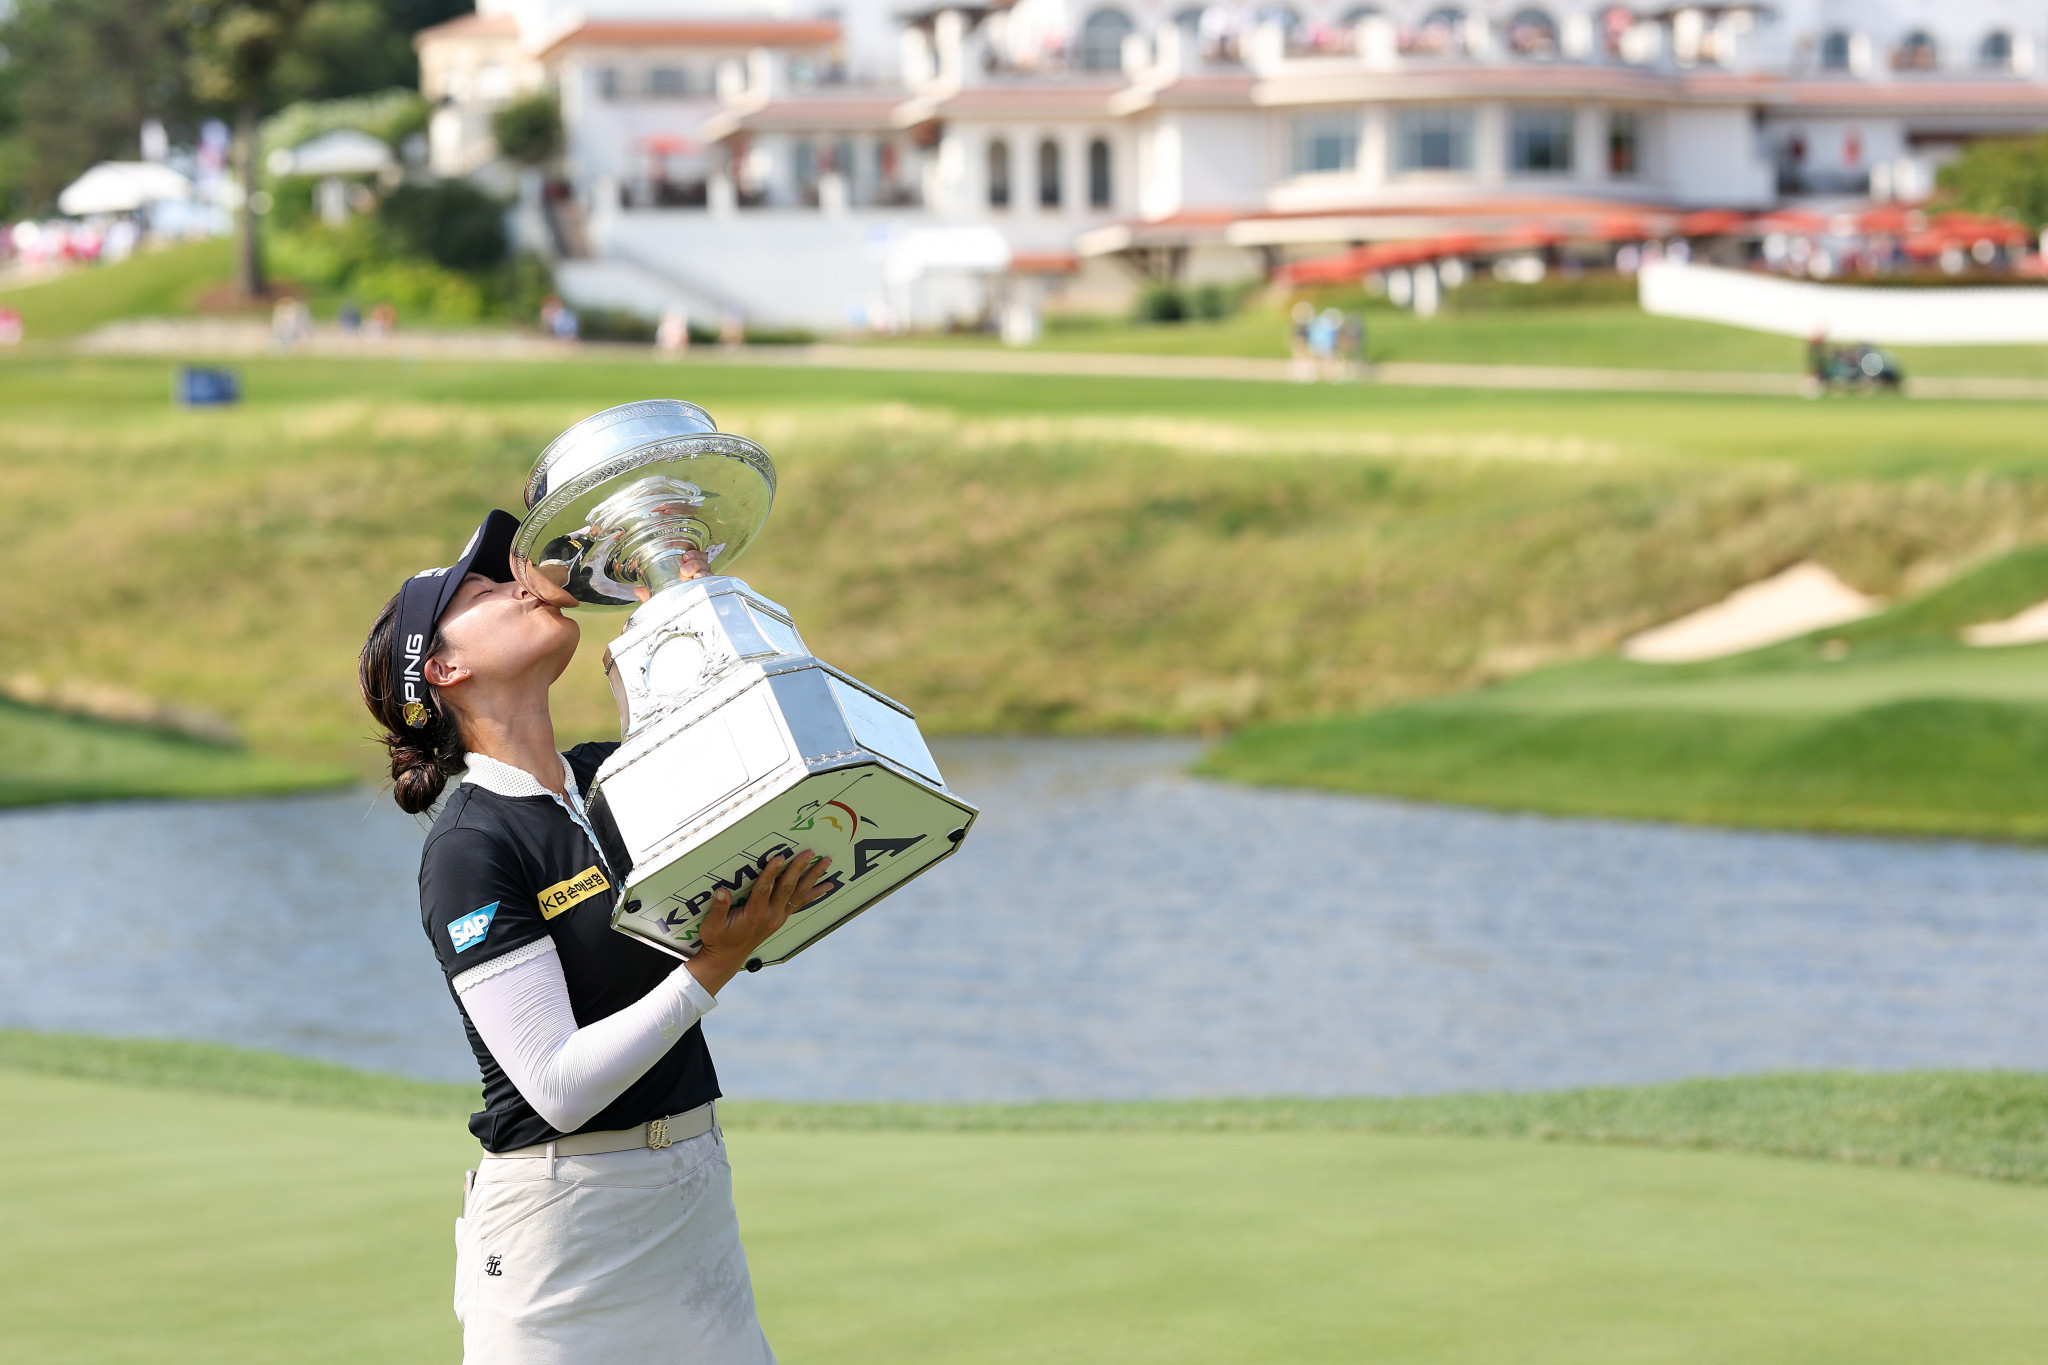 Chun holds on to win Women's PGA Championship by a single shot